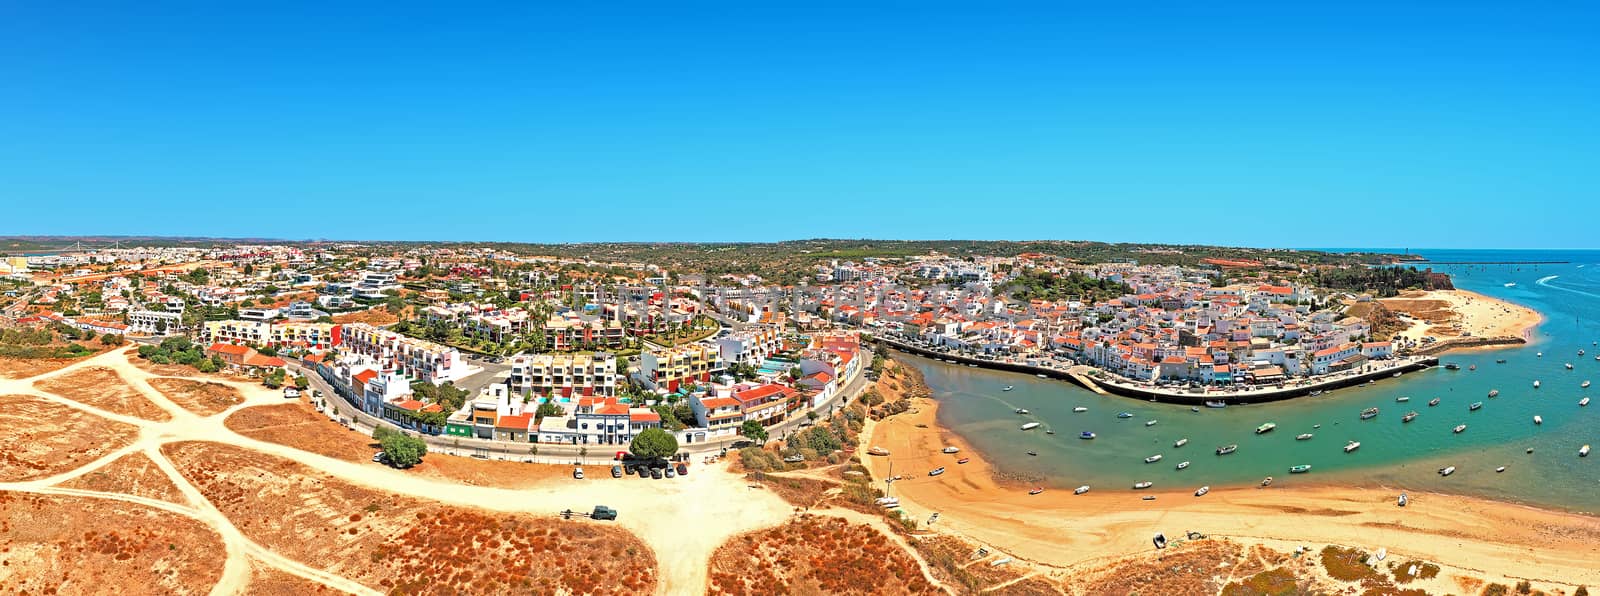 Aerial panorama from the village Ferragudo in the Algarve Portug by devy